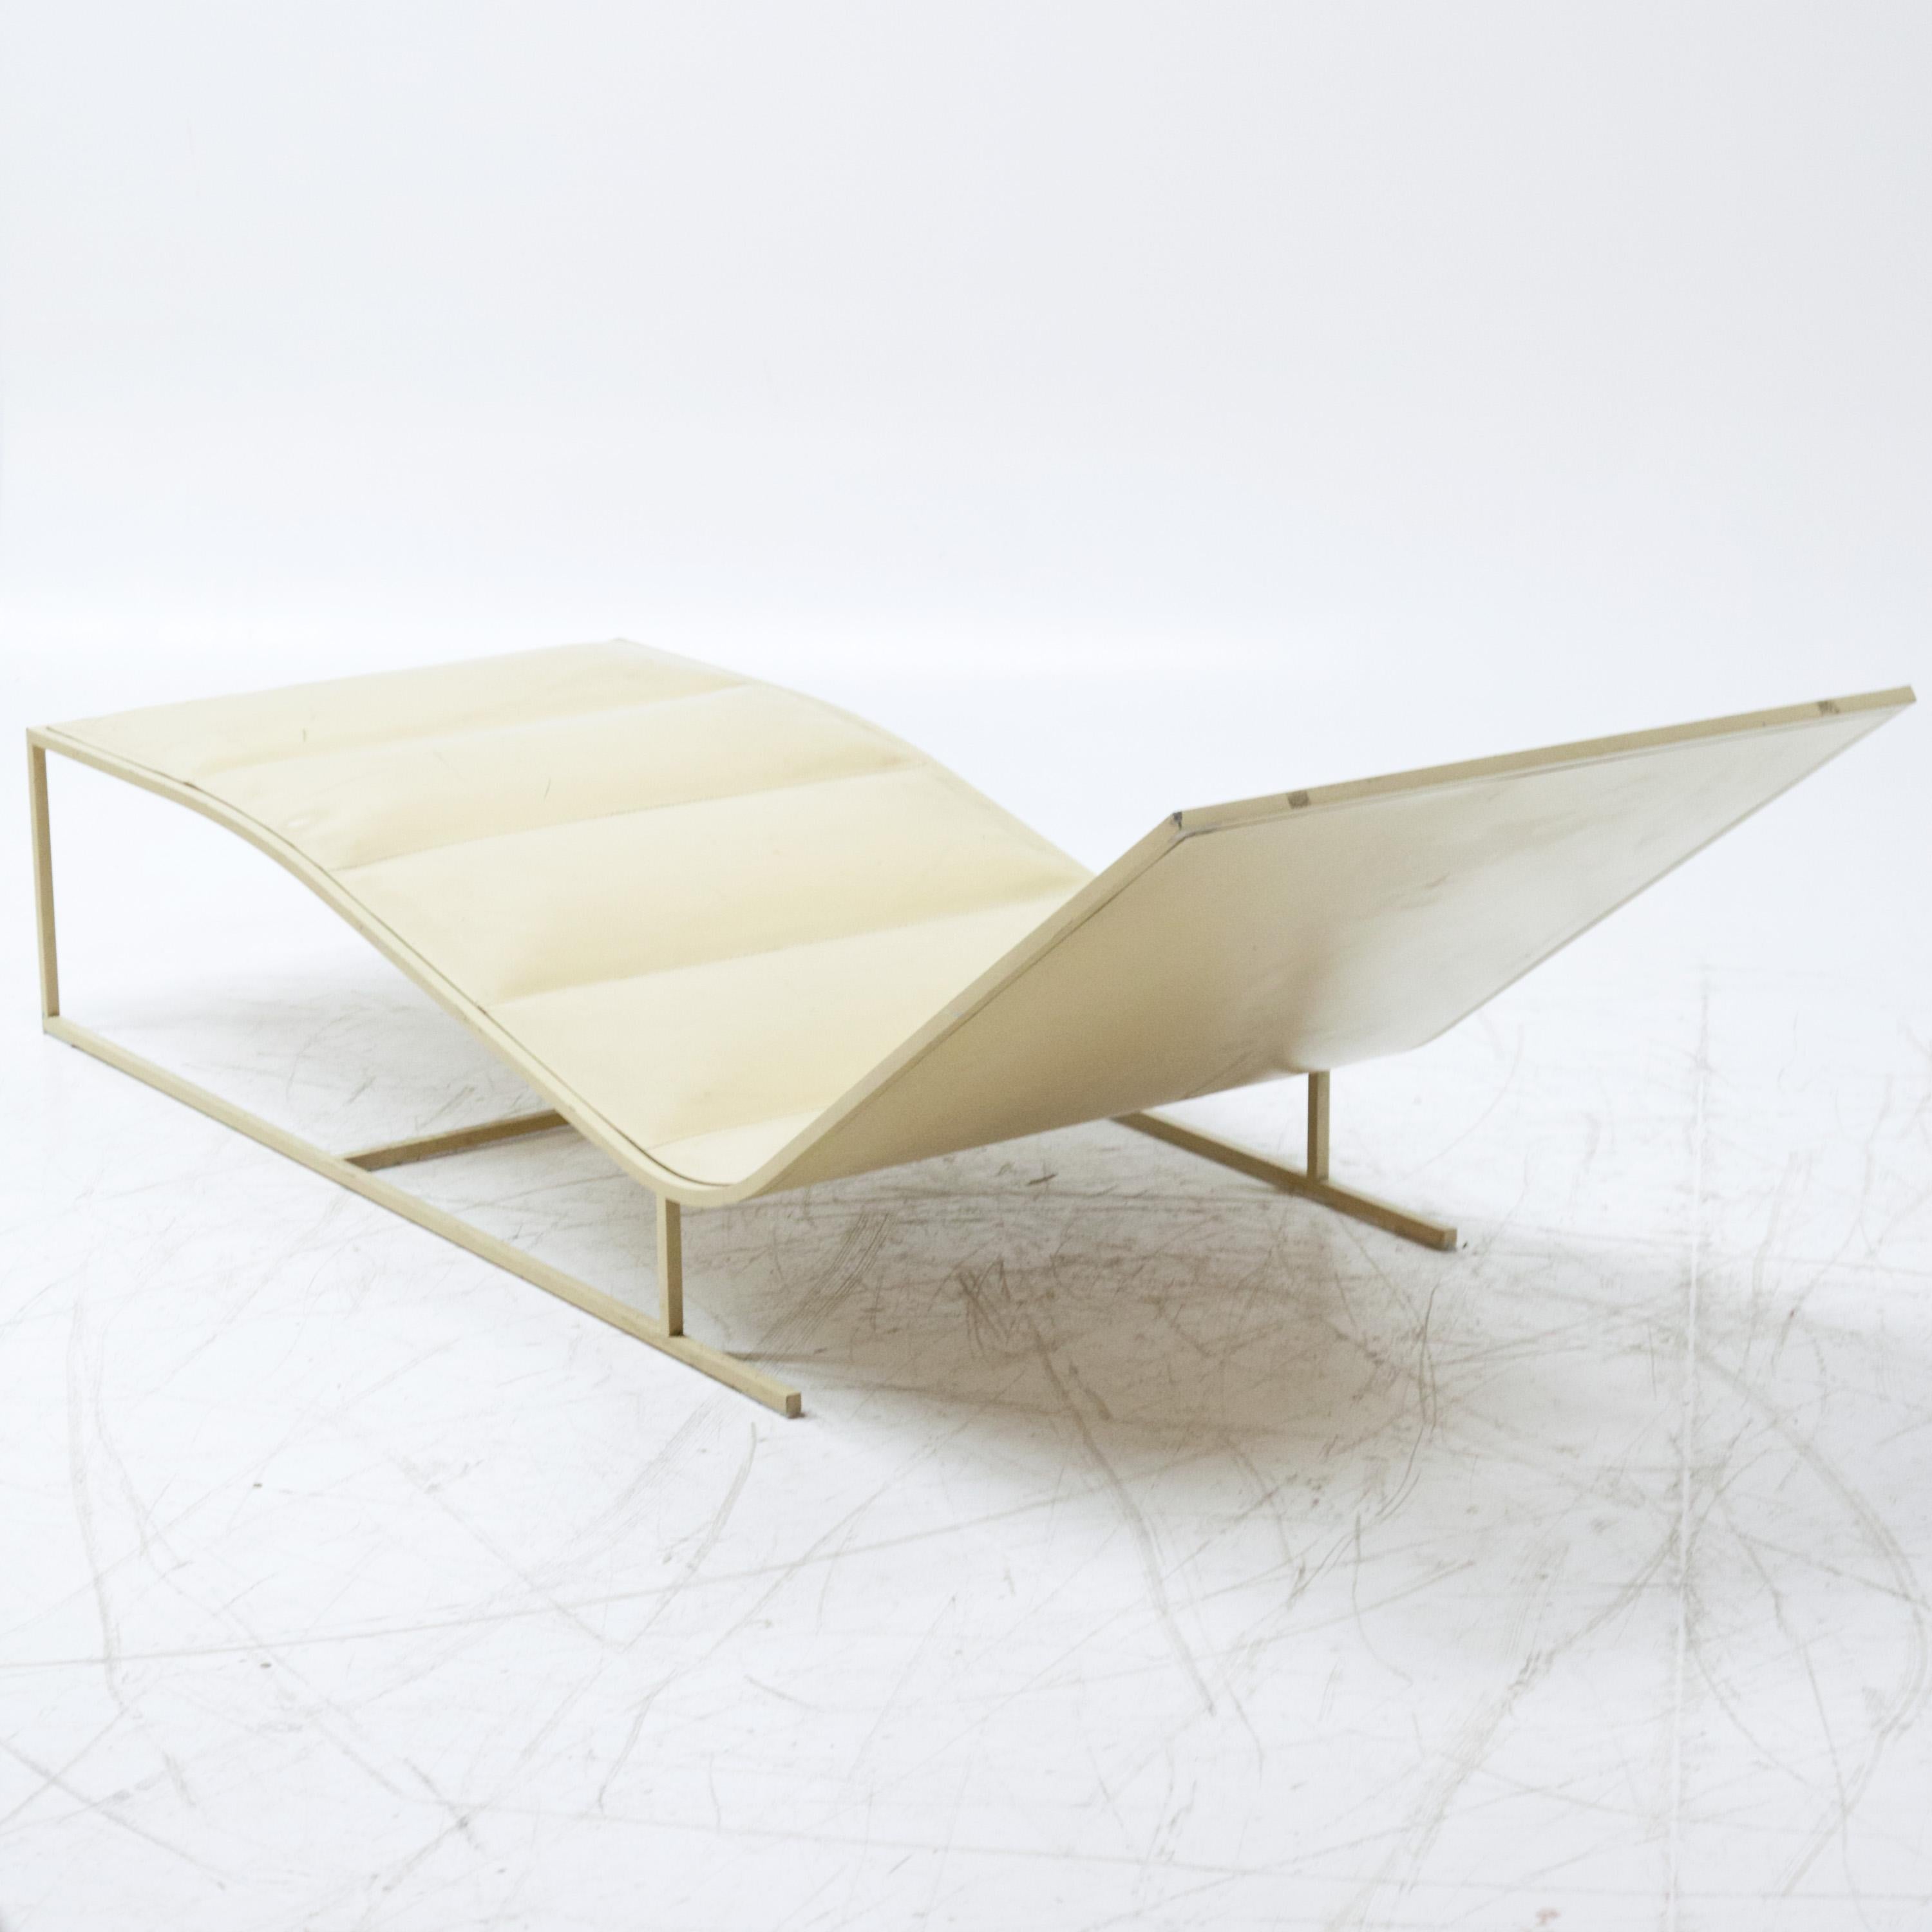 20th Century Midcentury Design Metal and Leather Lounger For Sale